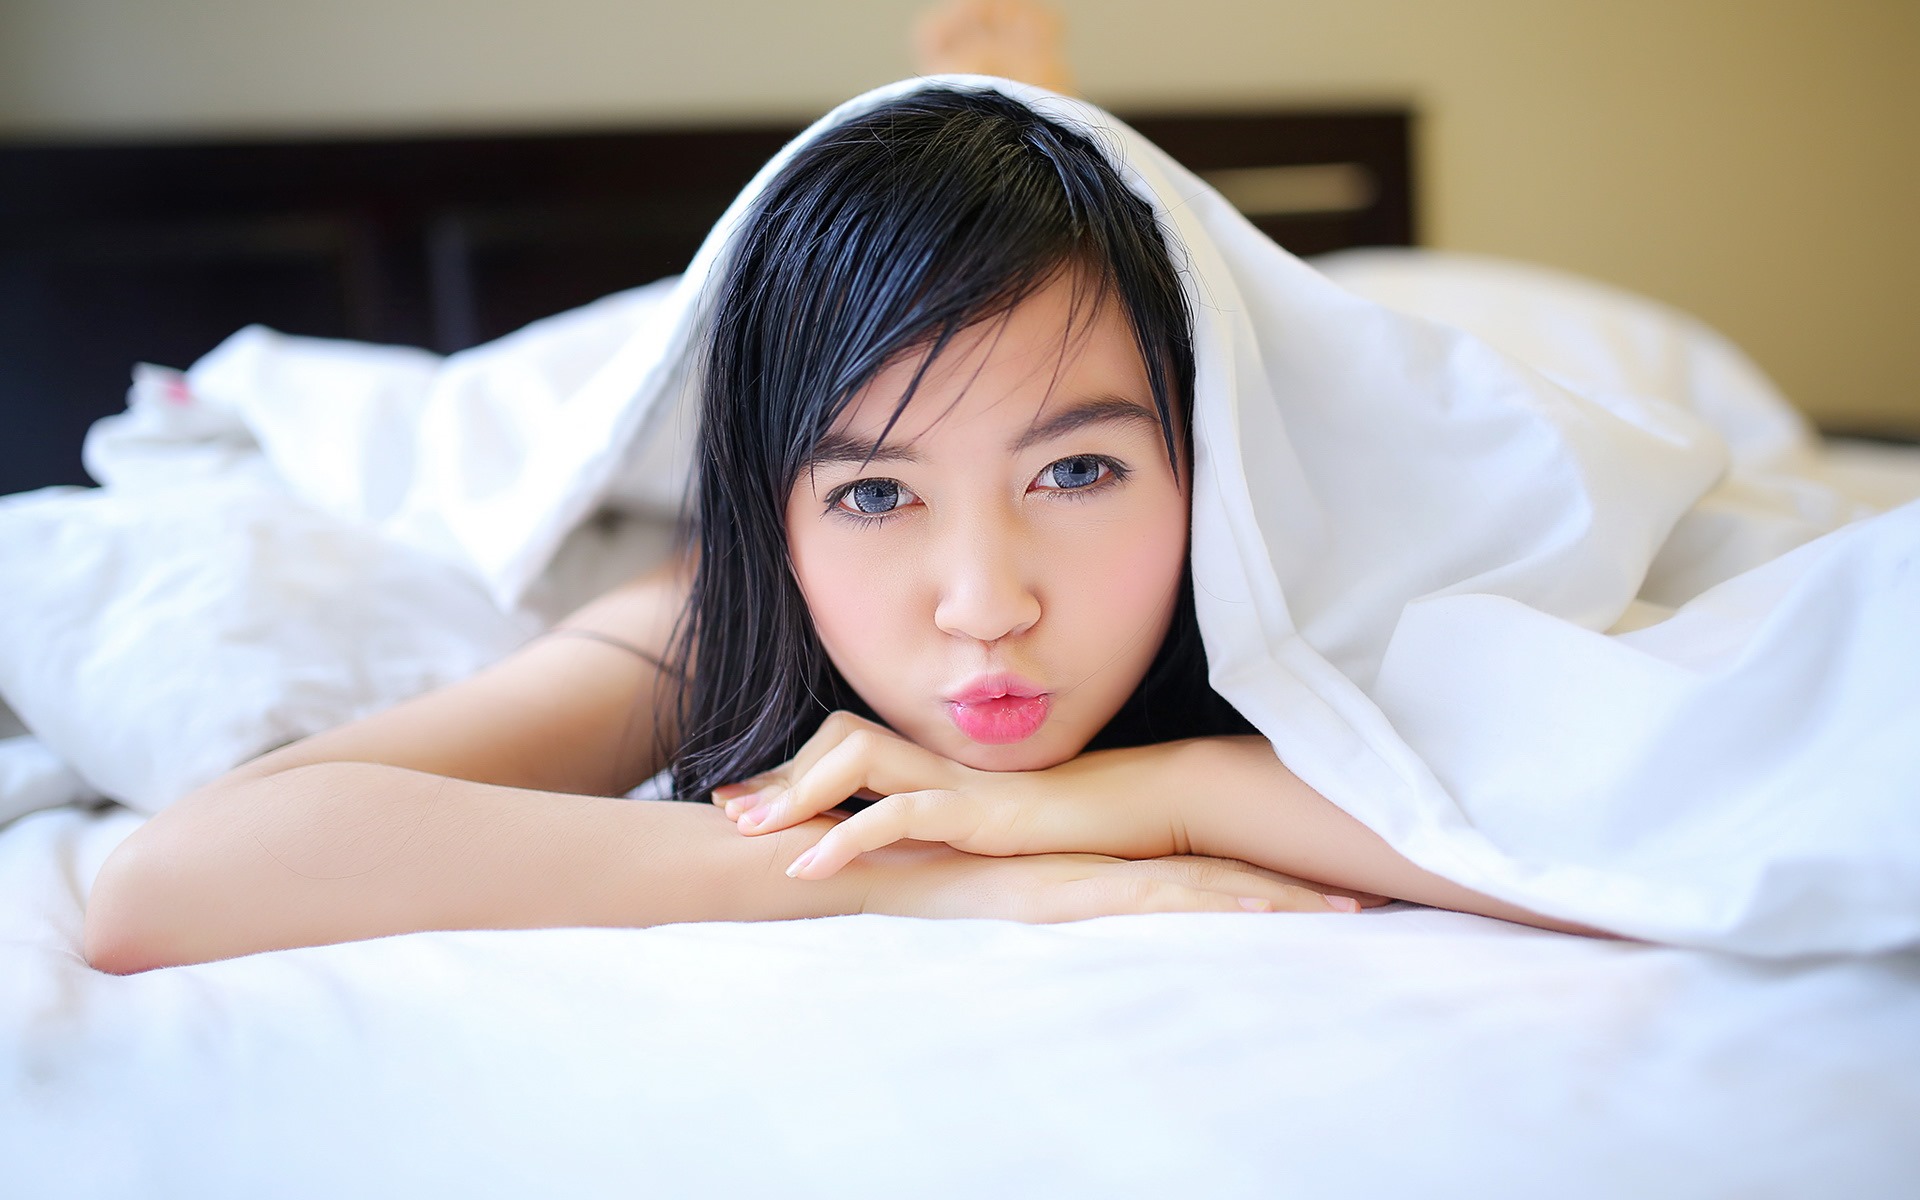 Pure and lovely young Asian girl HD wallpapers collection (2) #10 - 1920x1200